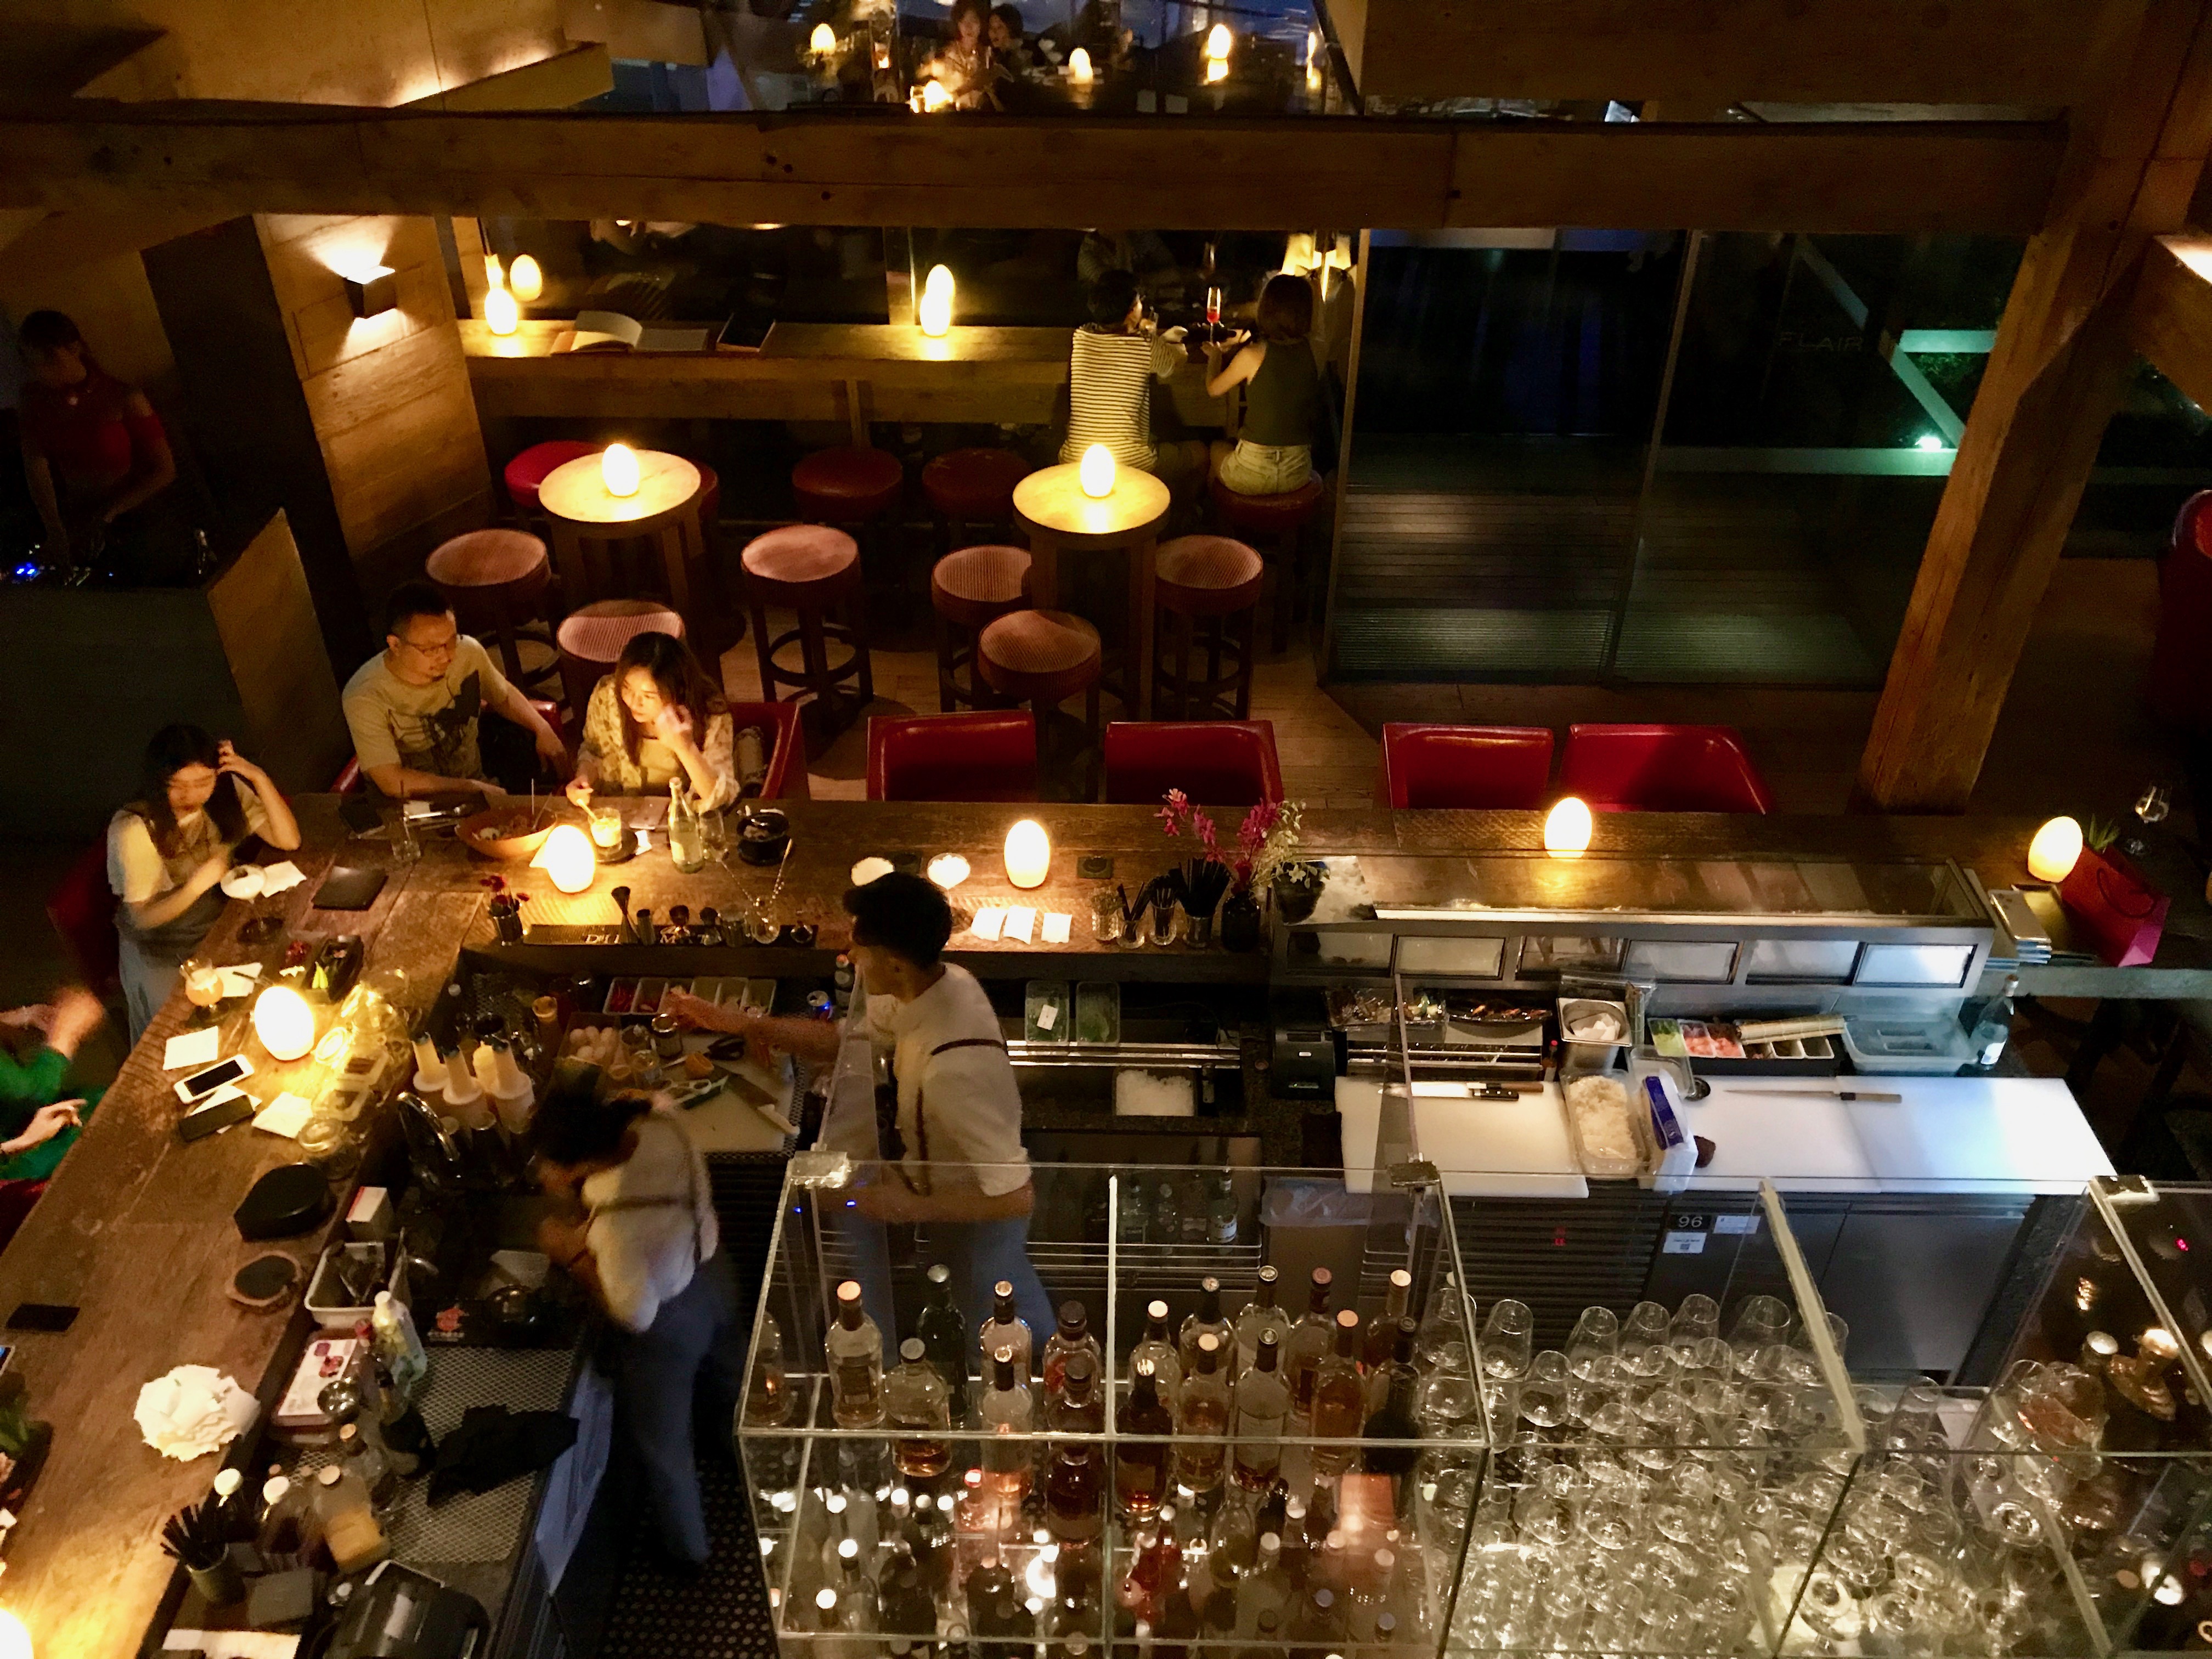 View of the indoor bar from the loft.